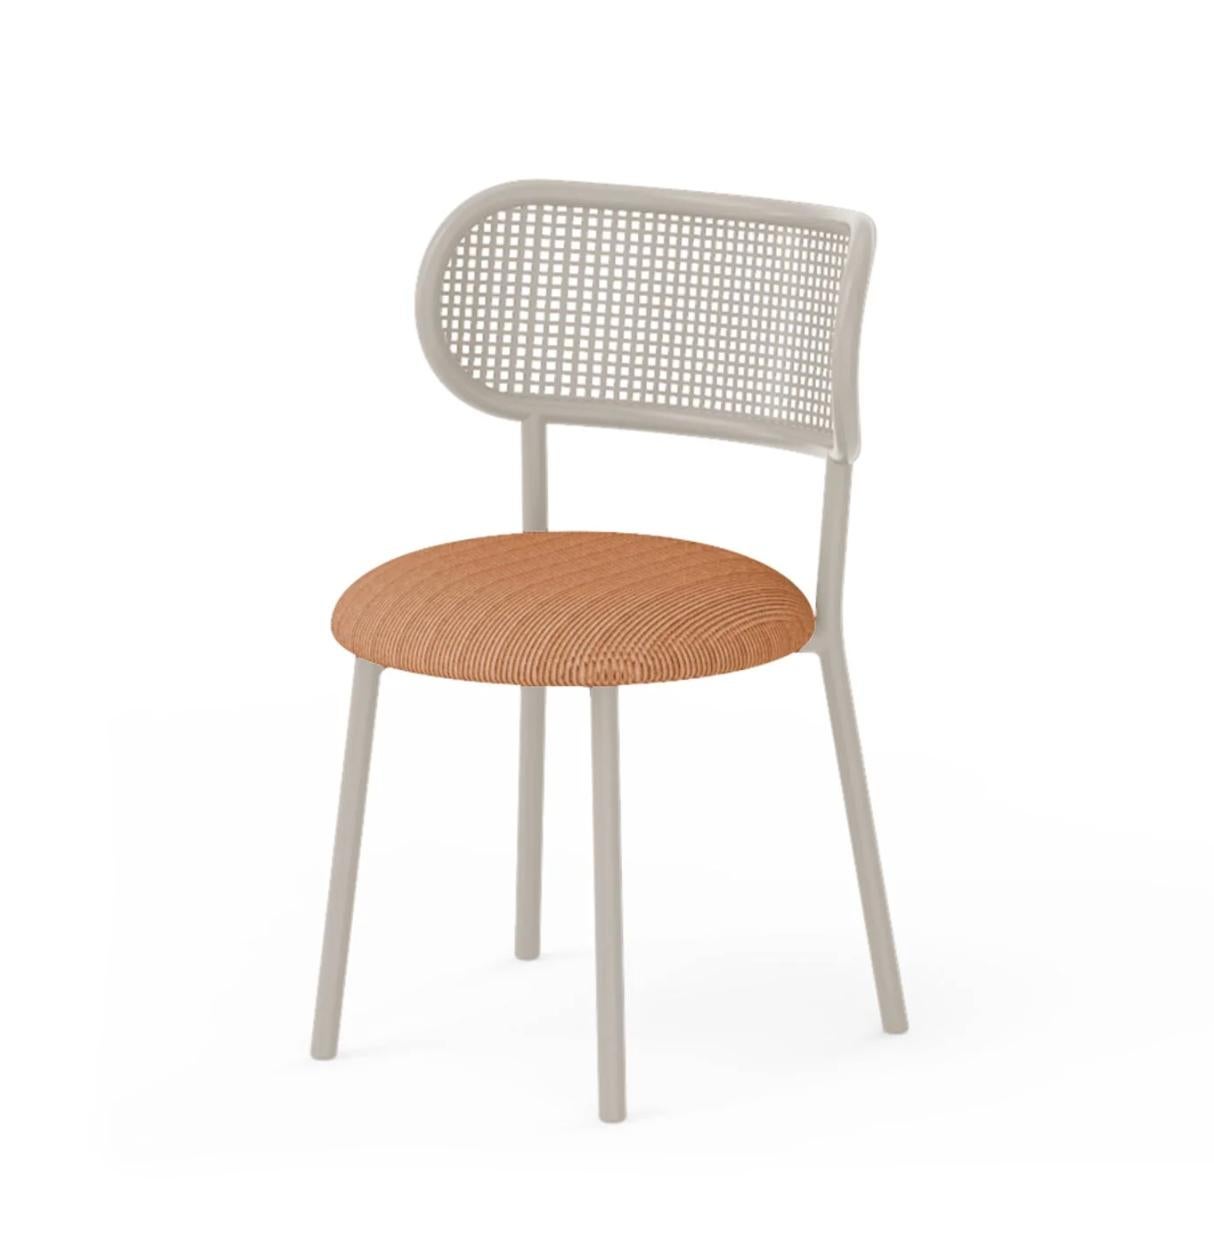 Portuguese Louise Chair with Steel Structure, Perforated Steel Back and Upholstery For Sale